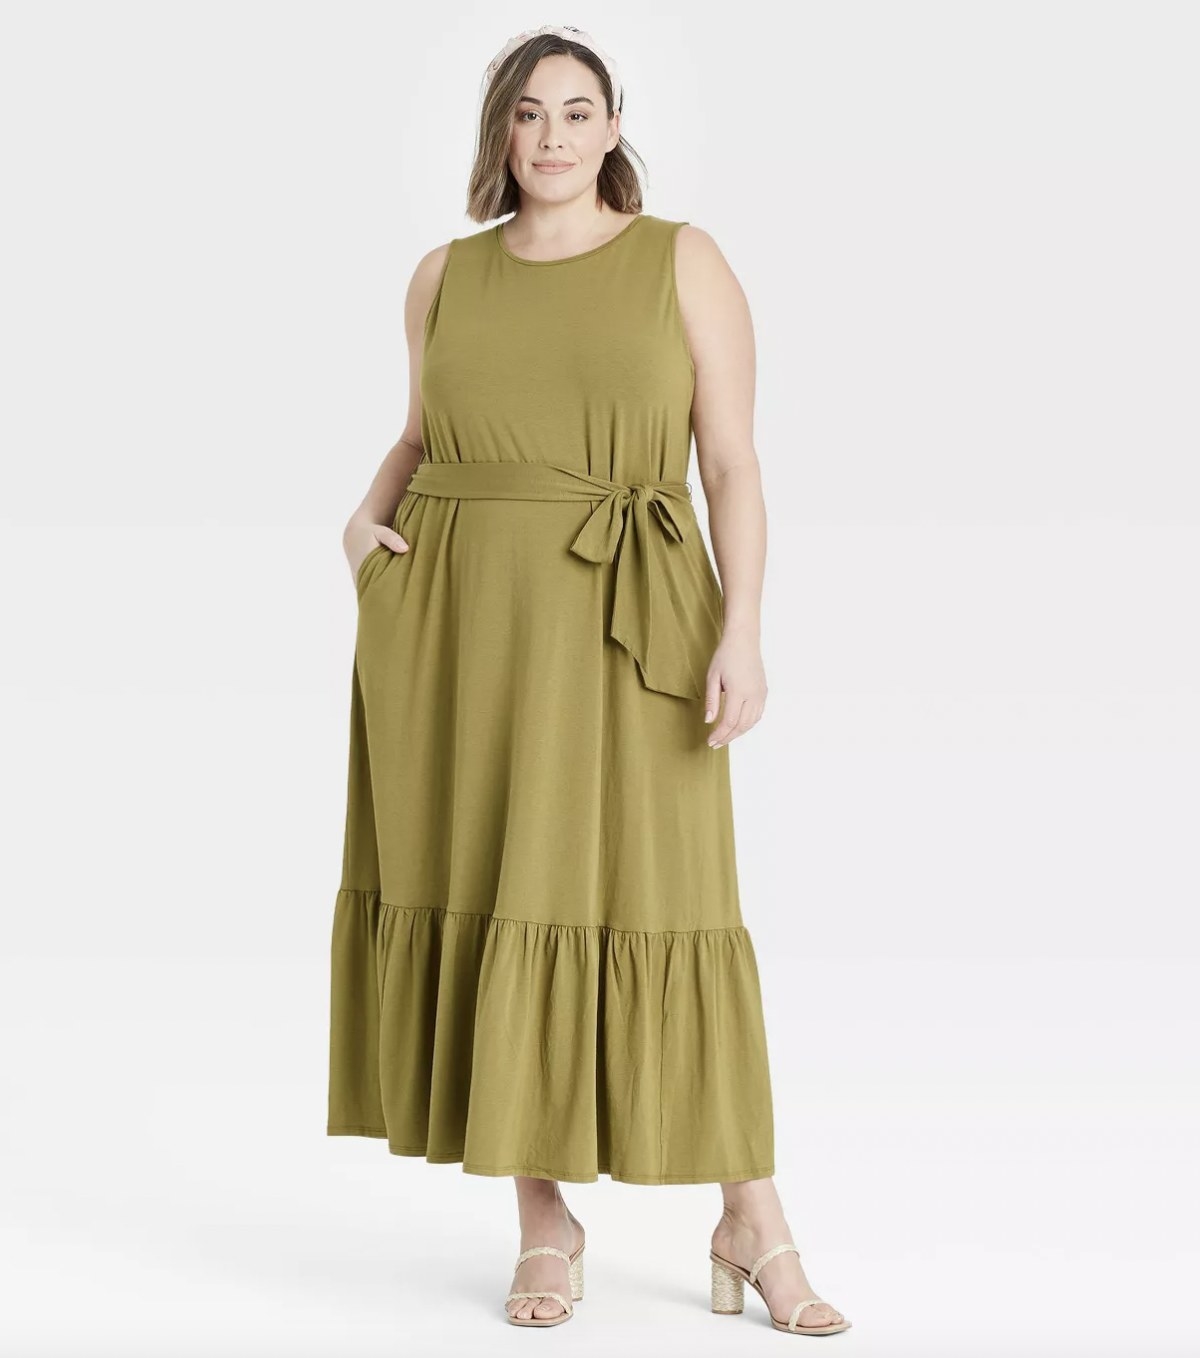 31 Stylish Warm Weather Dresses From Target To Buy